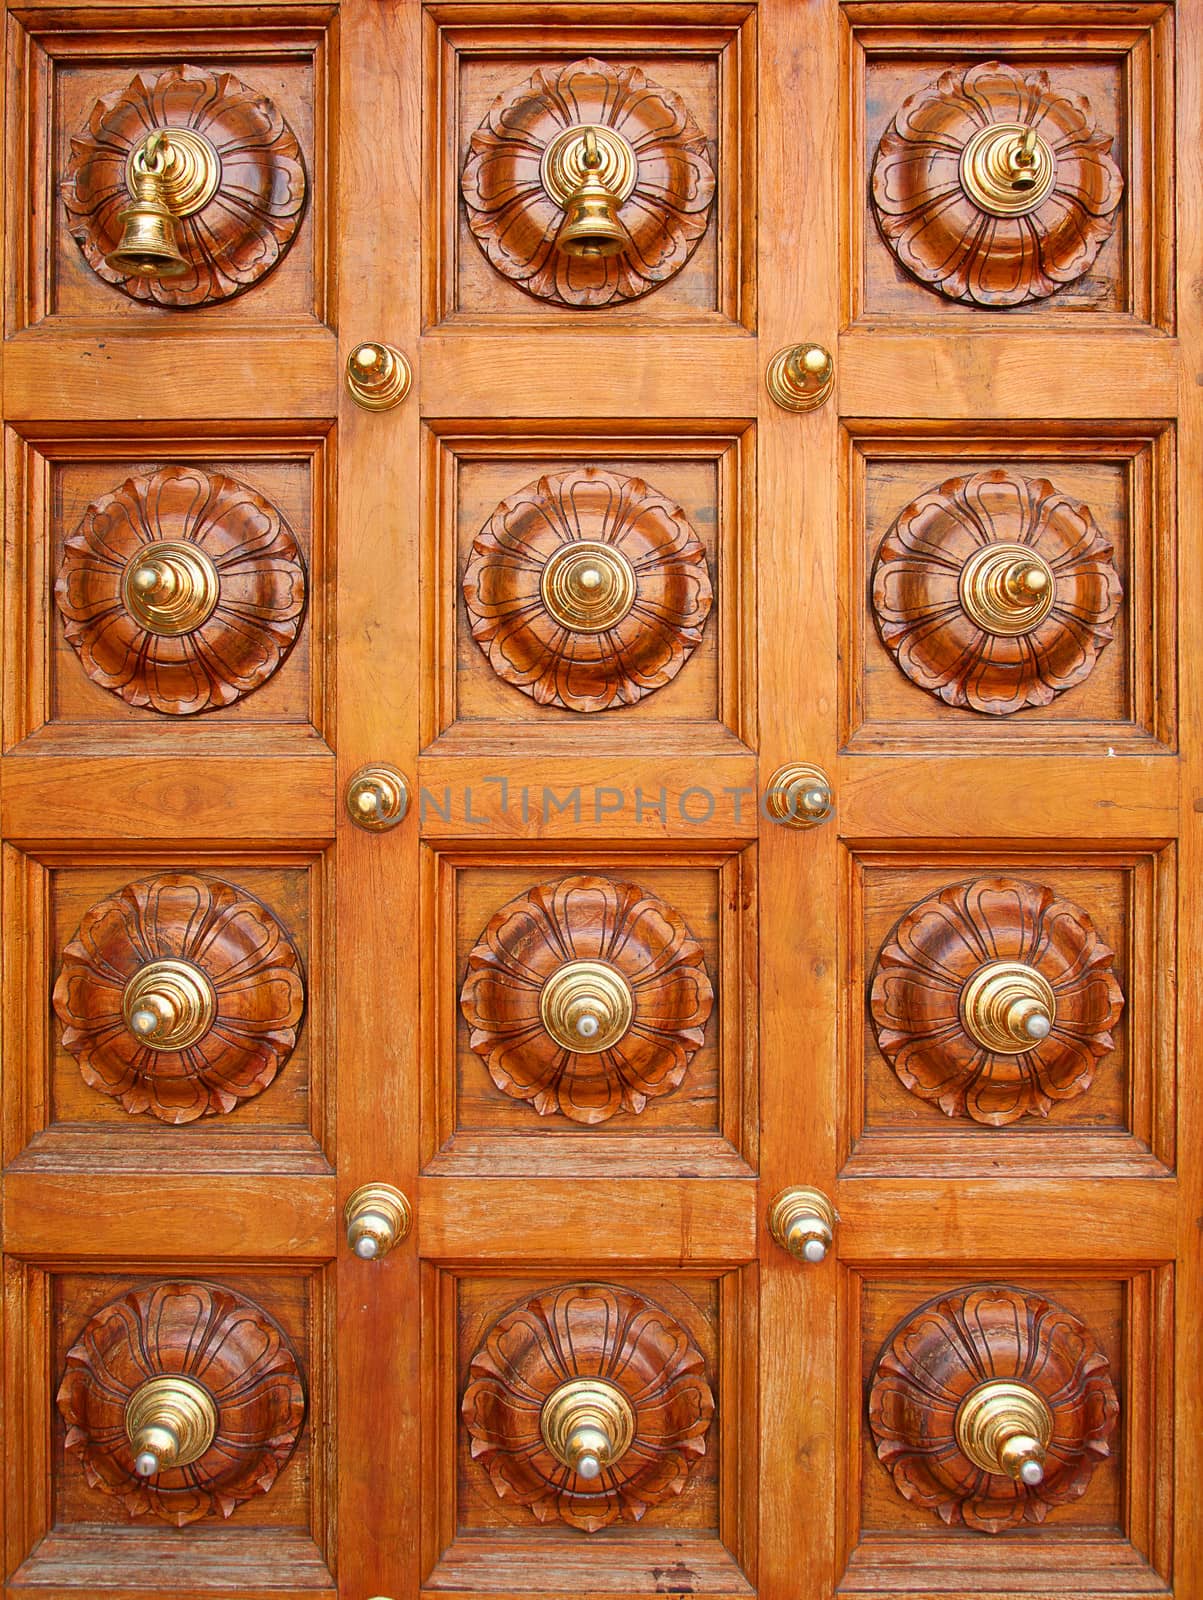 Ornated door of the hindu temple